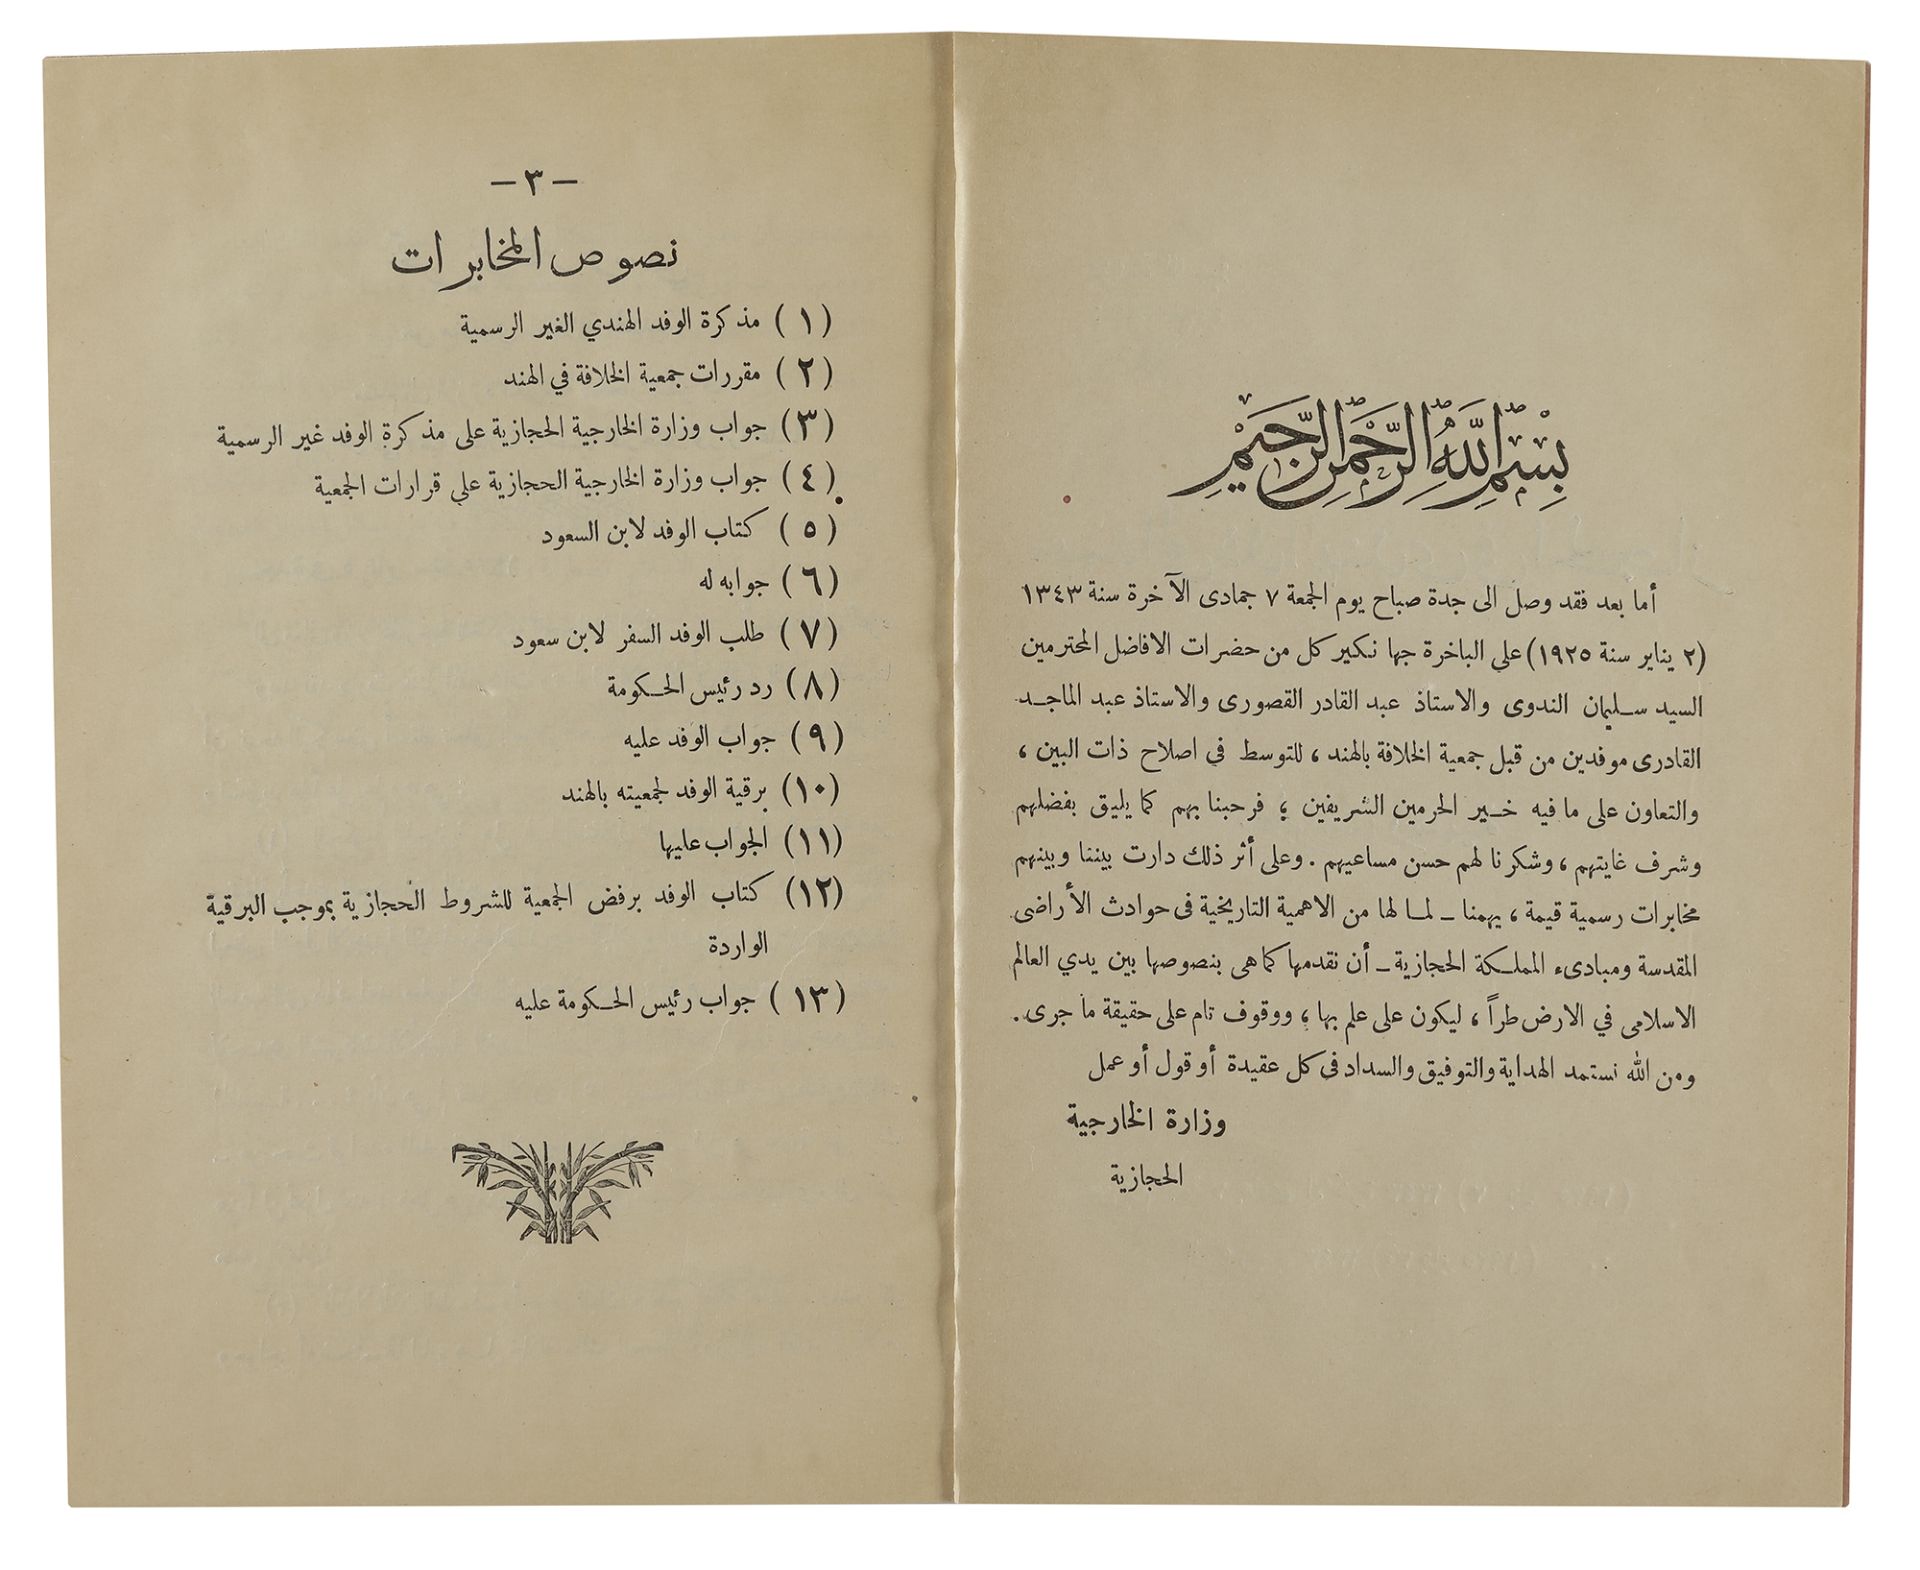 AN IMPORTANT BOOK ‘THE INDIAN DELEGATION’S MISSION IN HIJAZ’ DURING THEIR VISIT TO HIJAZ BETWEEN 7TH - Image 2 of 5